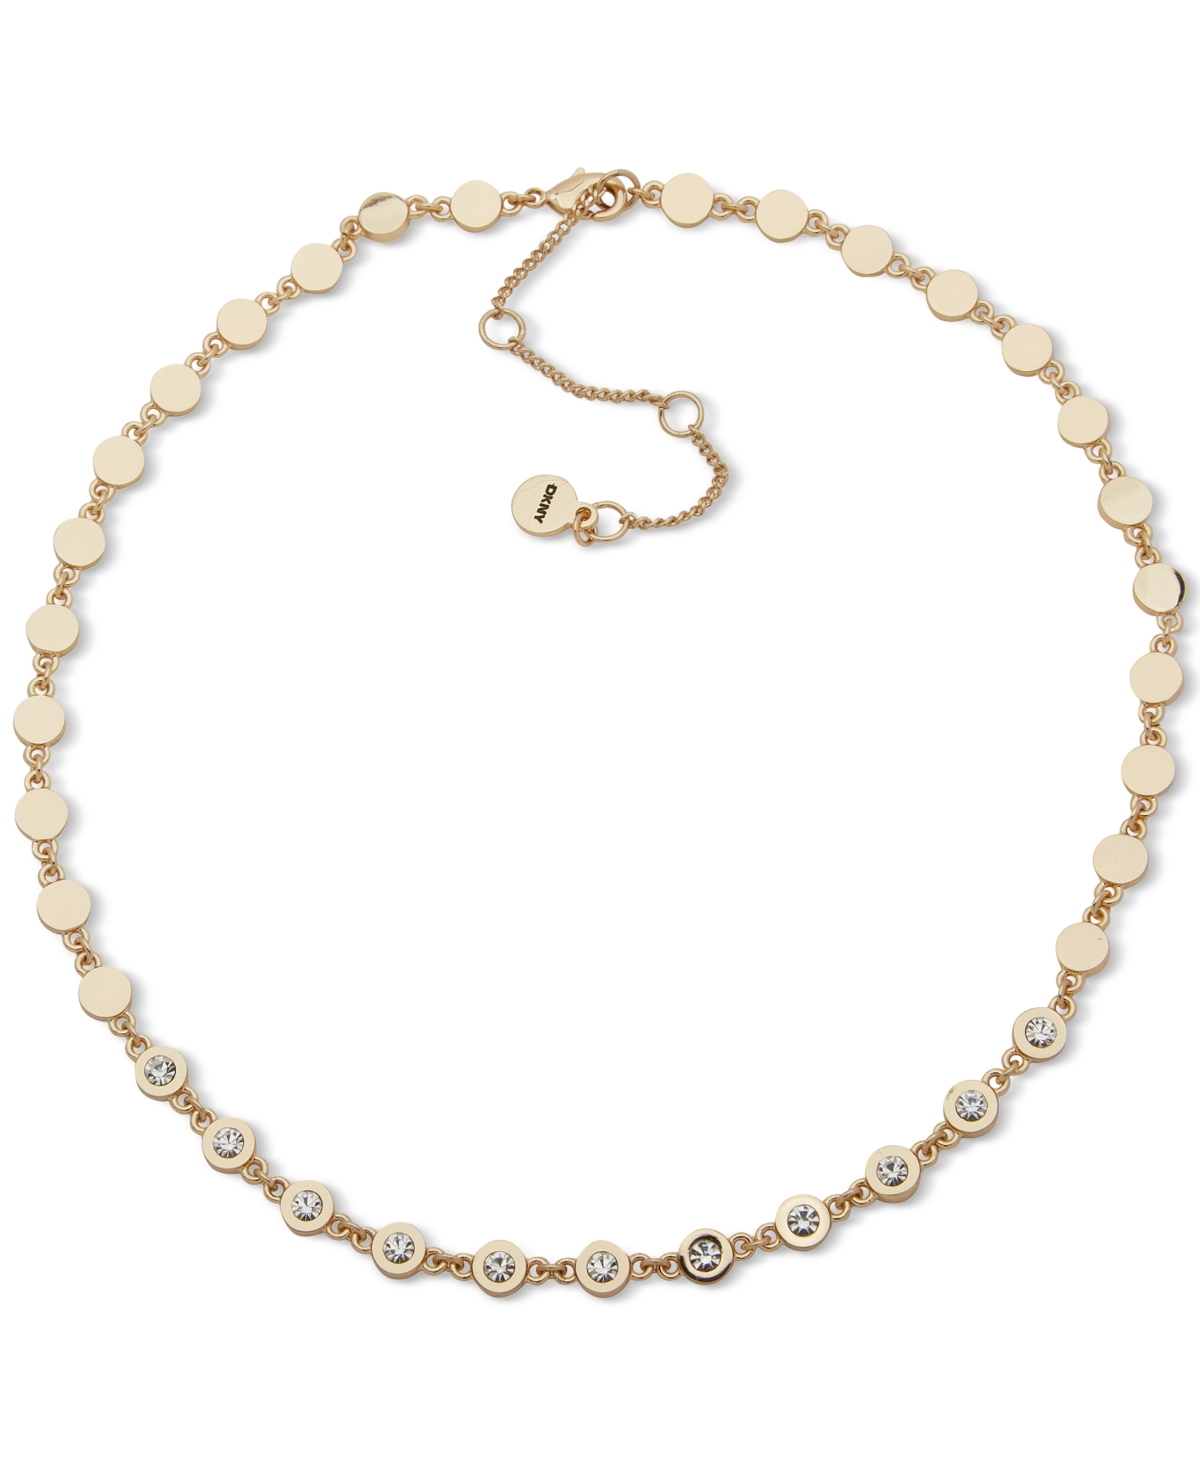 Gold-Tone Crystal Disc Collar Necklace, 16" + 3" extender - Crystal Wh